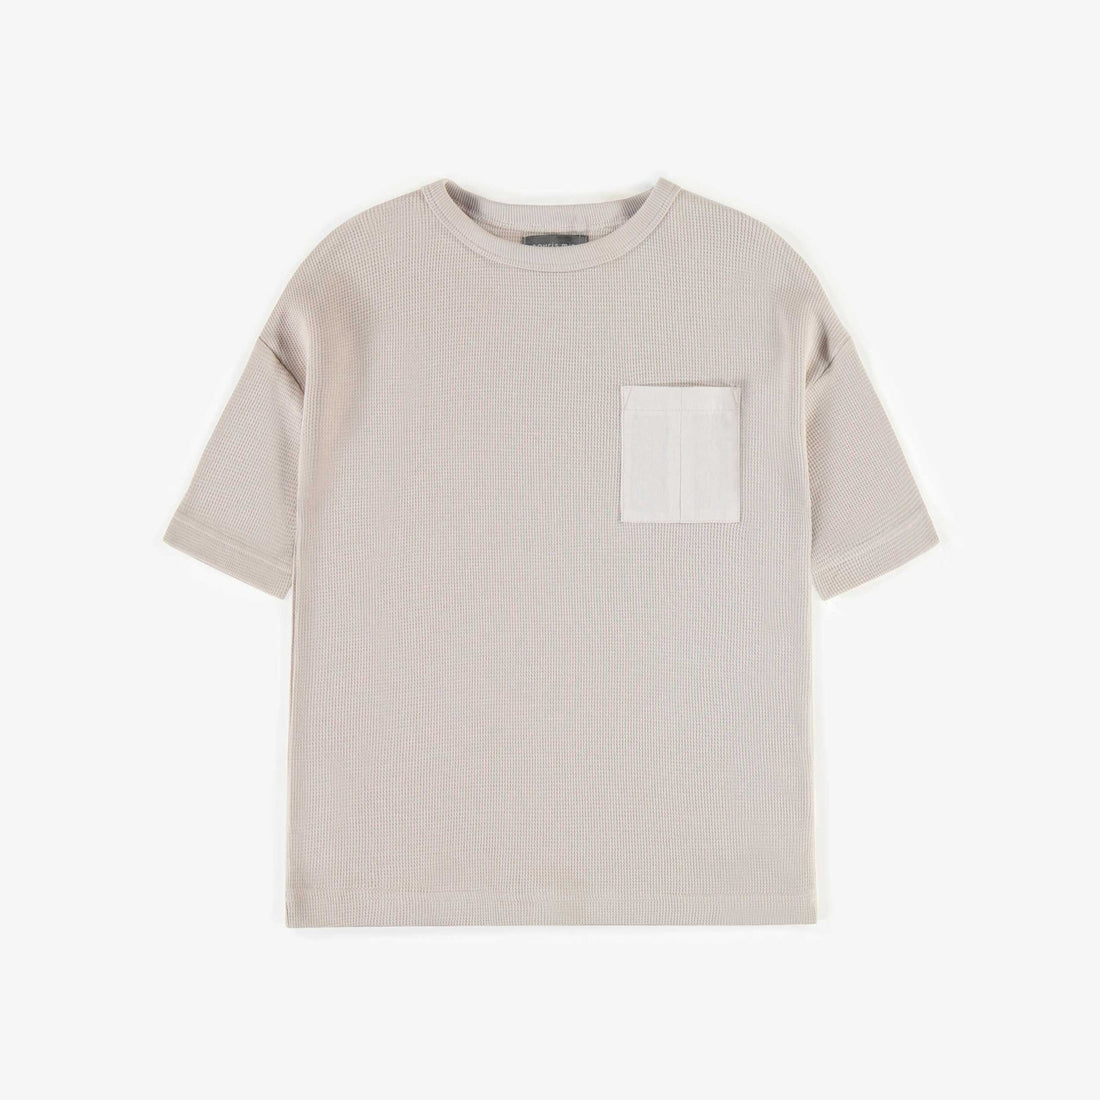 GREY SHORT-SLEEVED T-SHIRT IN WAFFLE JERSEY, CHILD